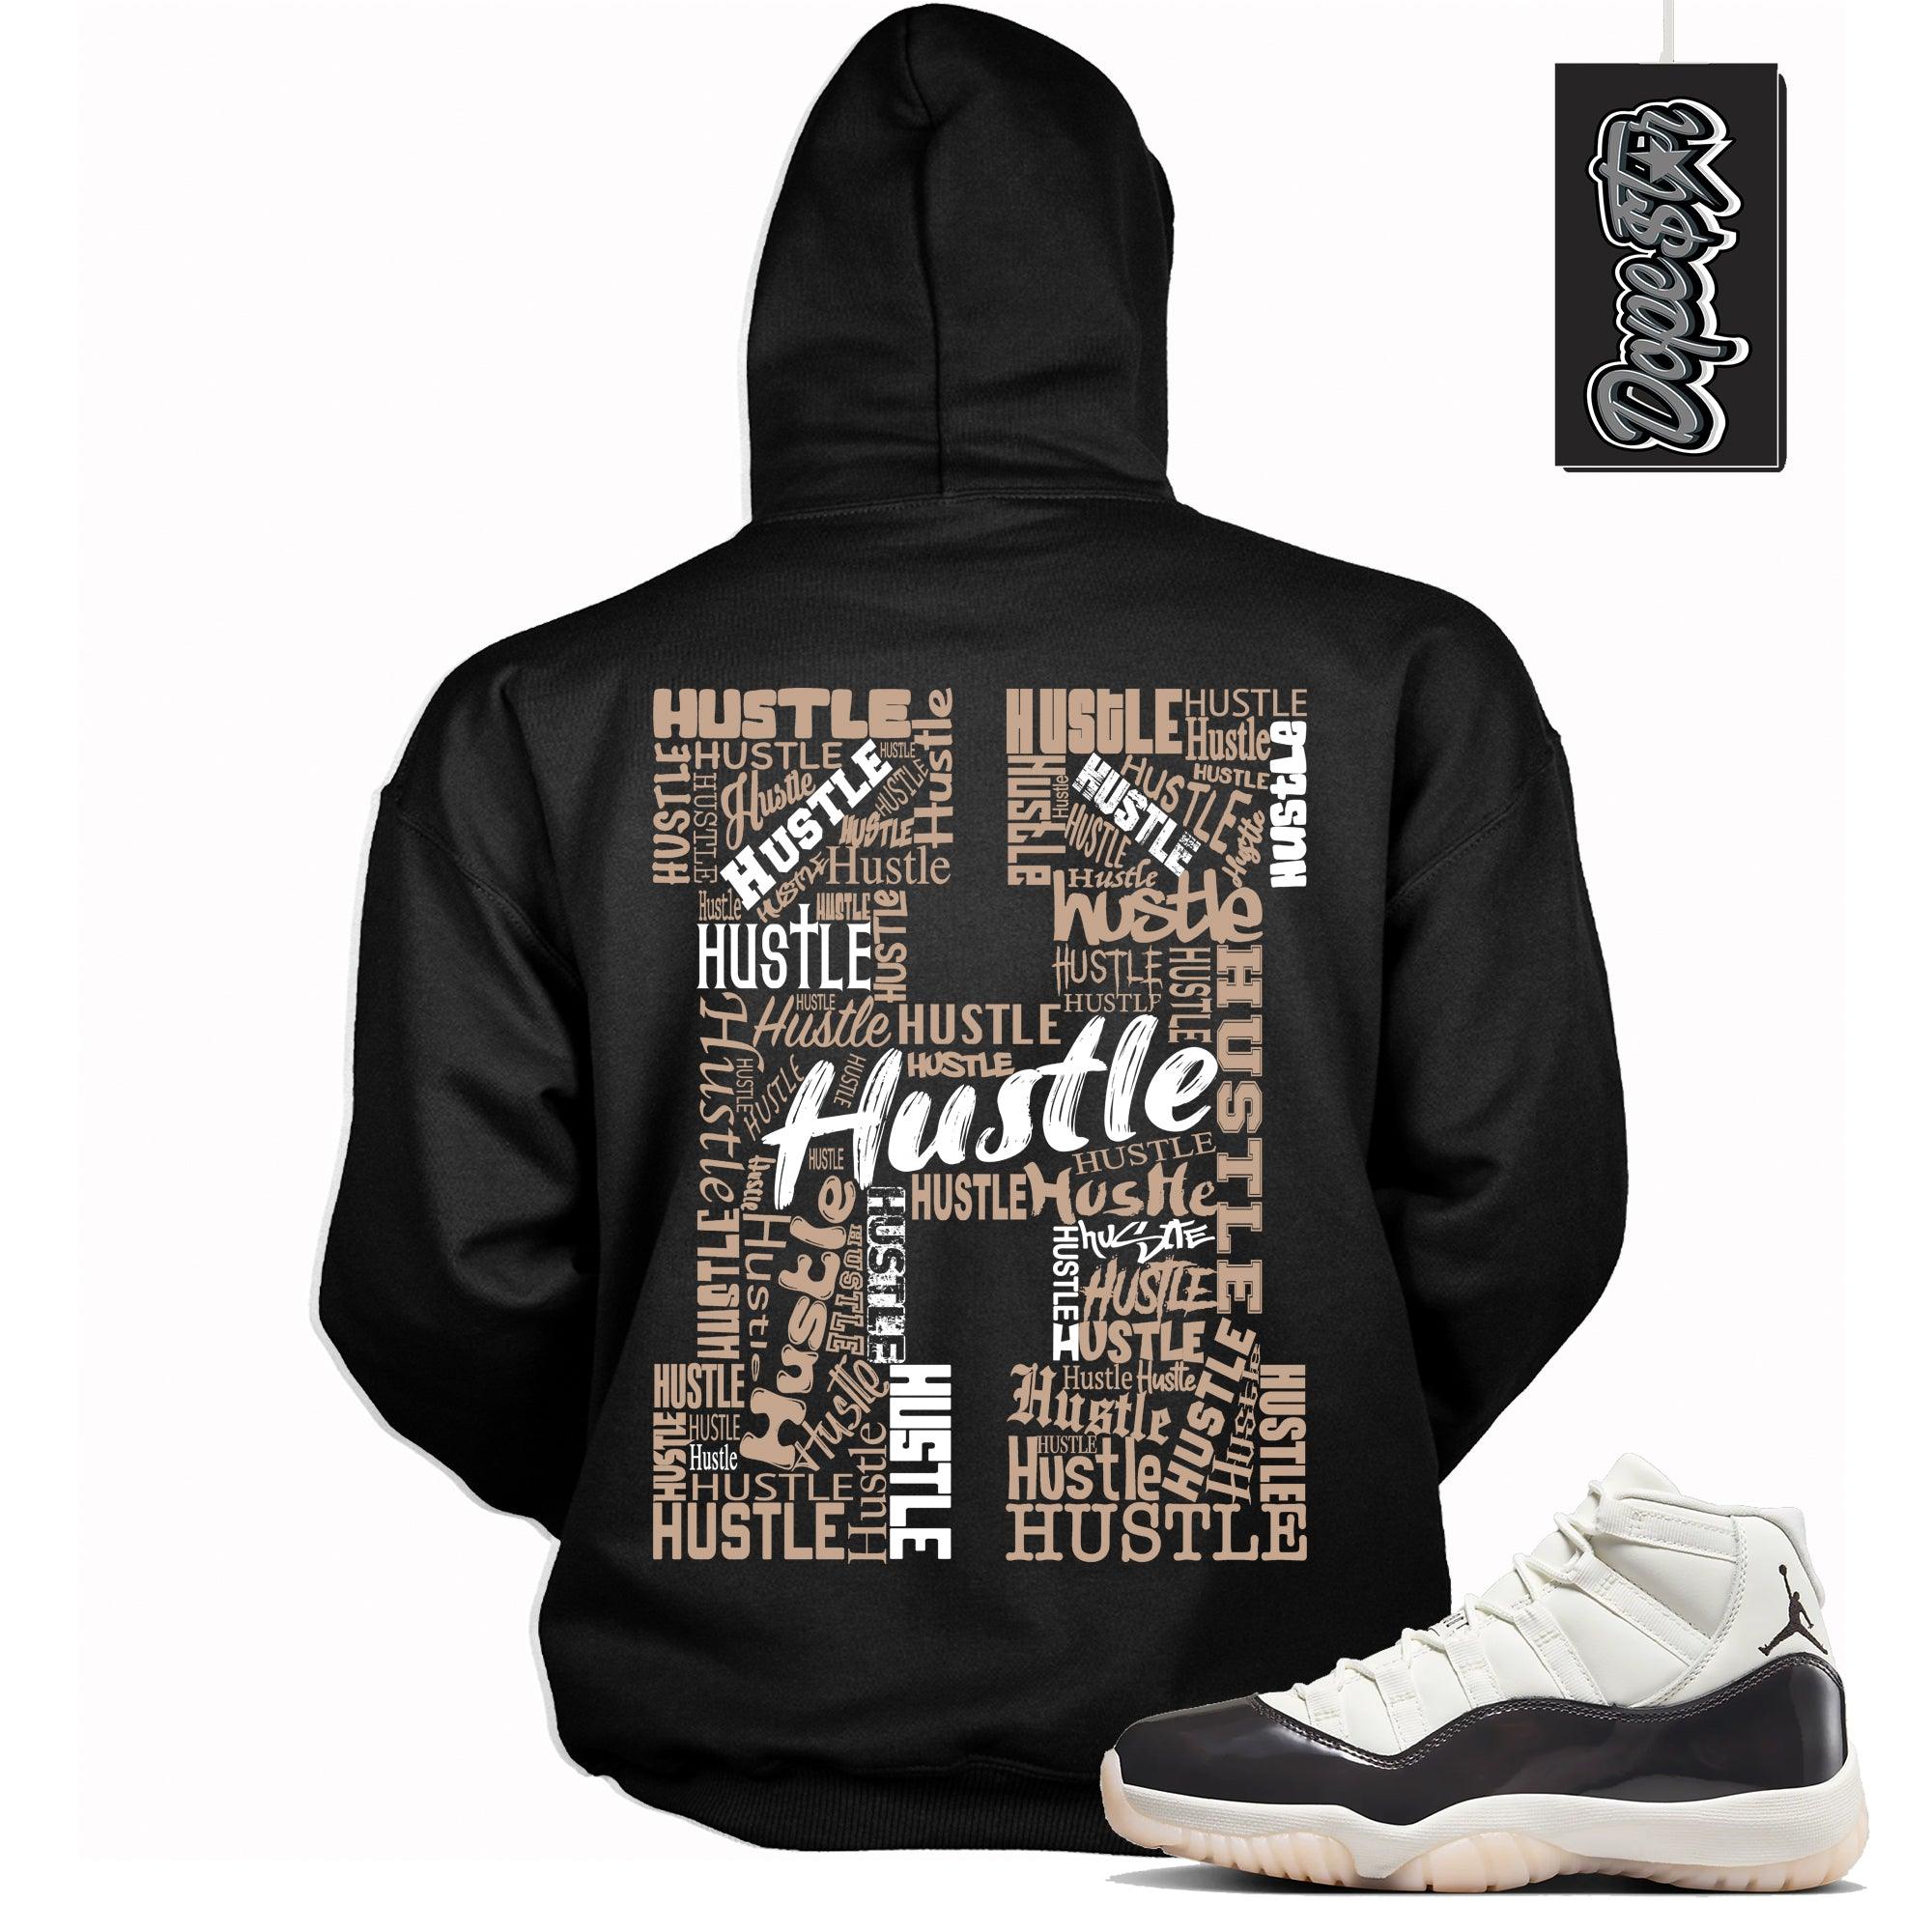 Cool Black Graphic Hoodie with “ Hustle H “ print, that perfectly matches Air Jordan 11 Neapolitan sneakers